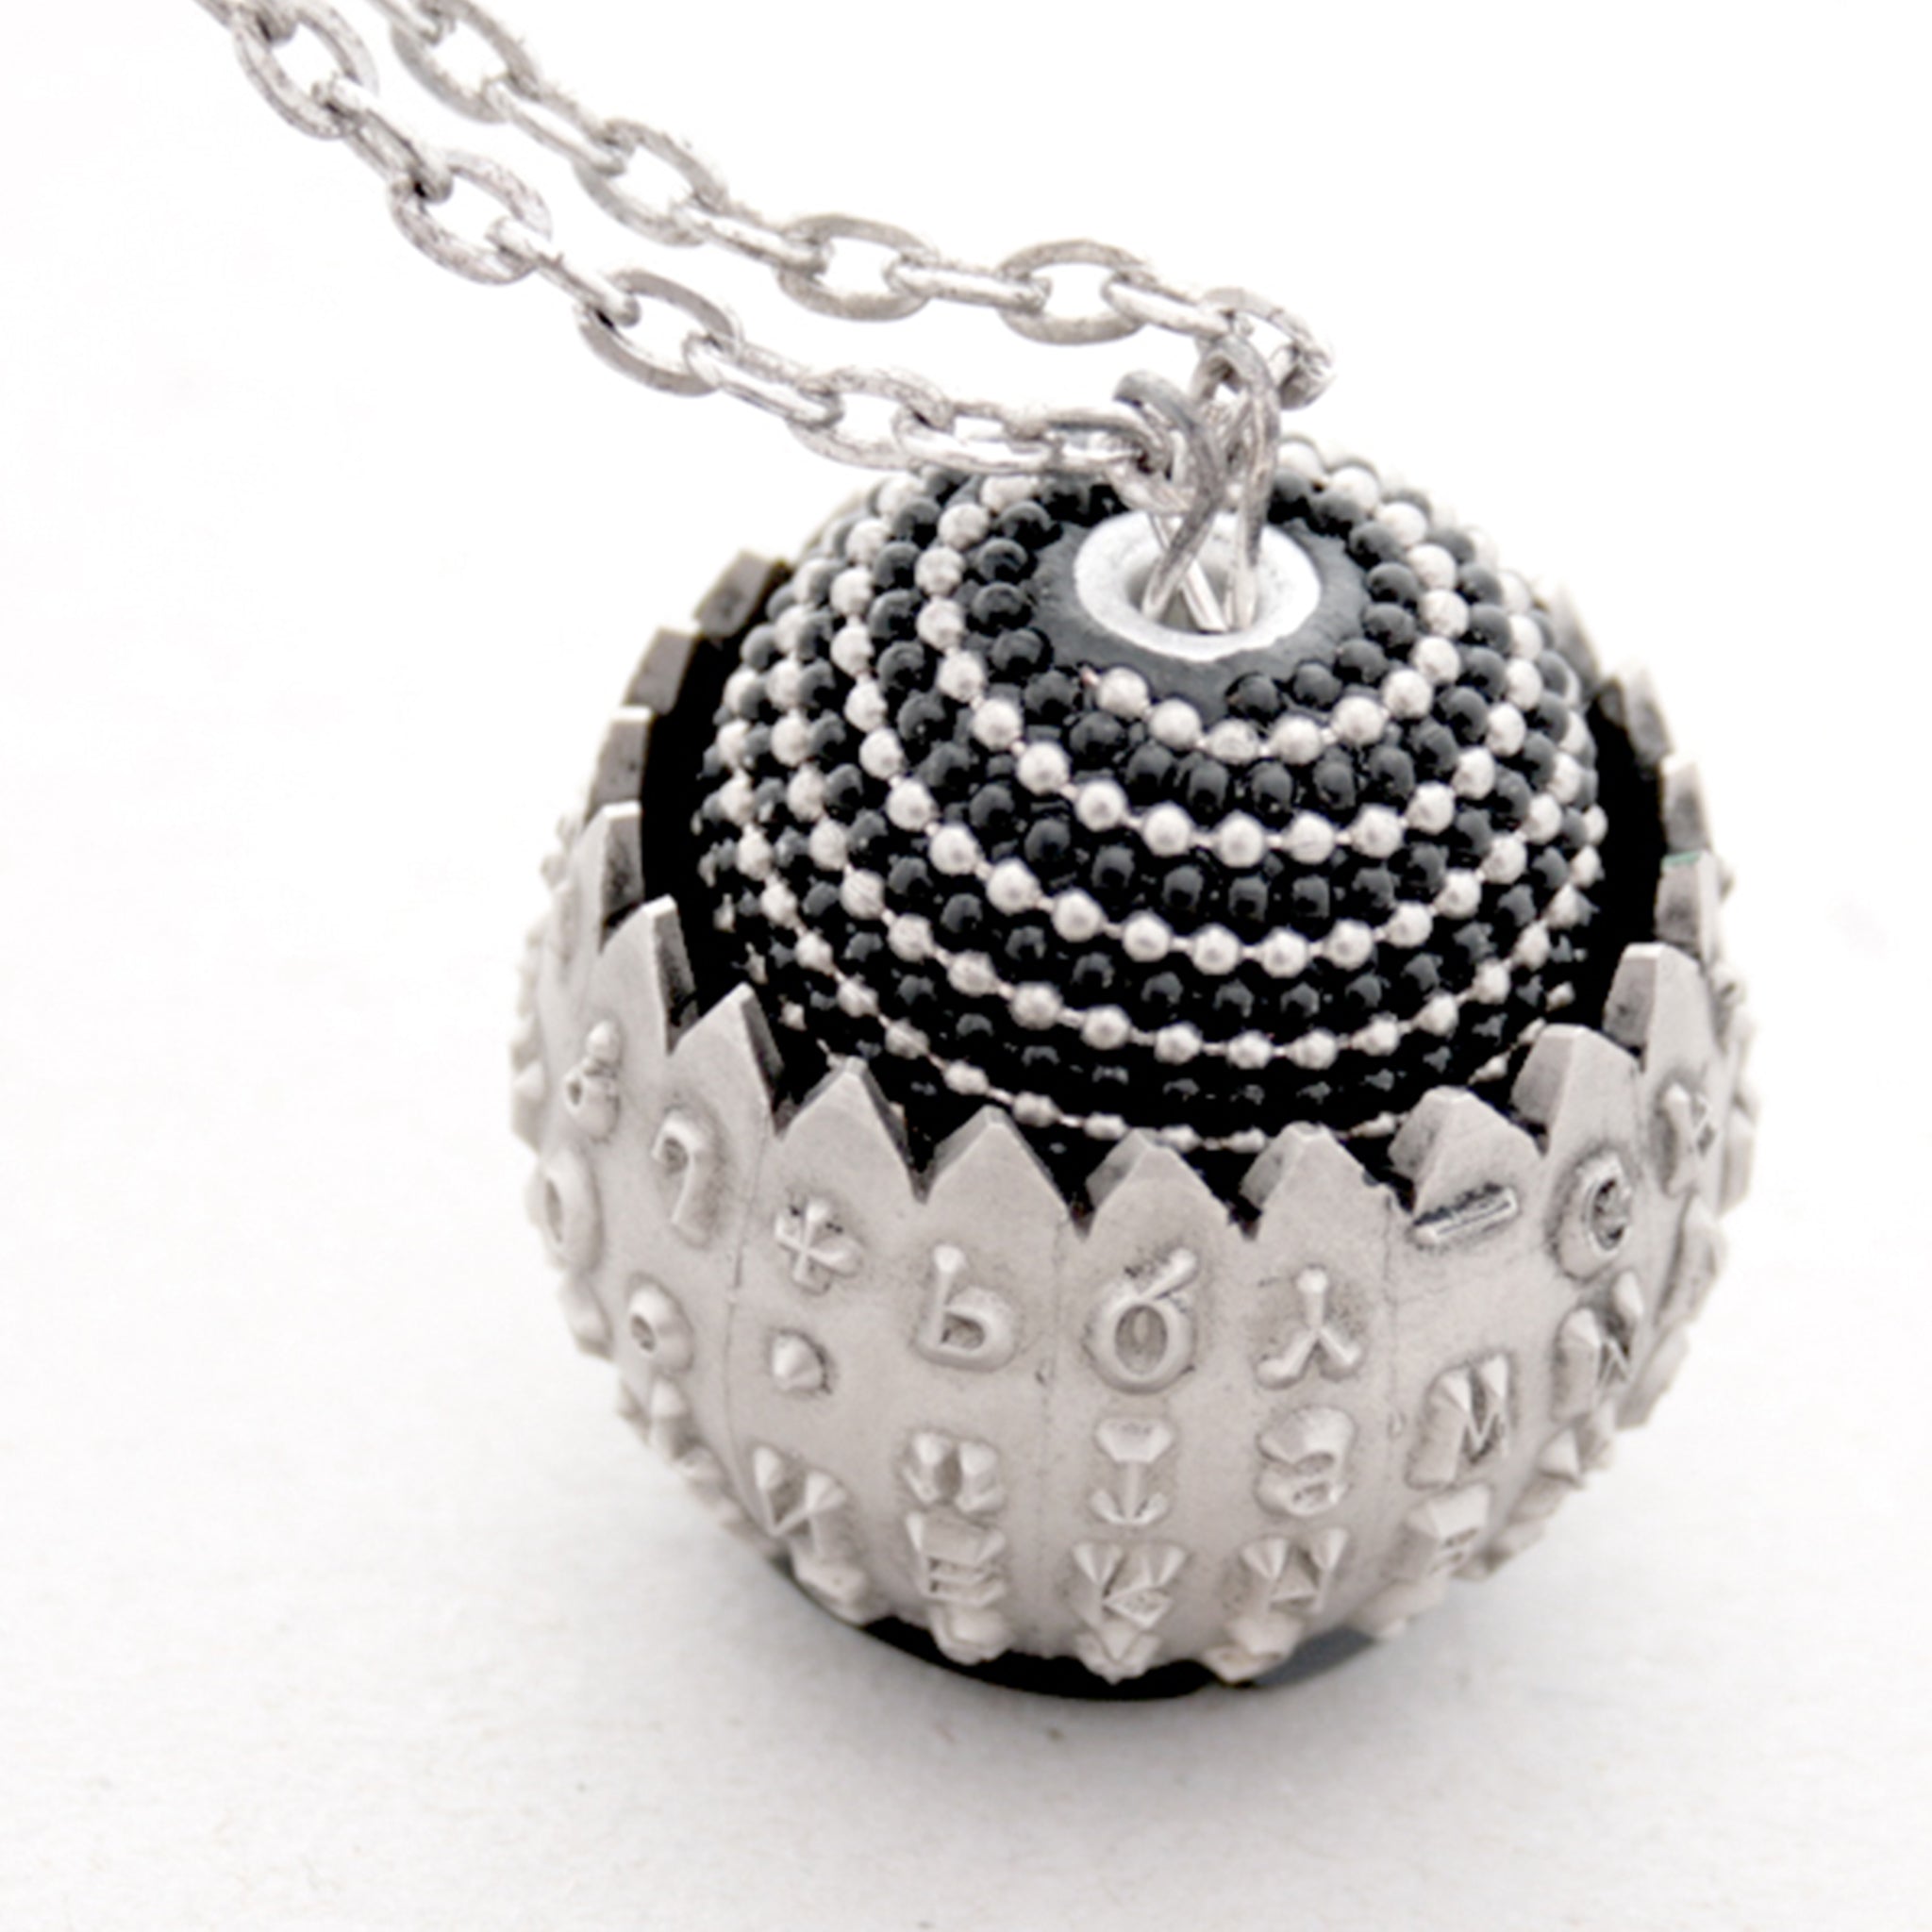 IBM Selectric typewriter font ball with large metal bead turned into eye catching necklace